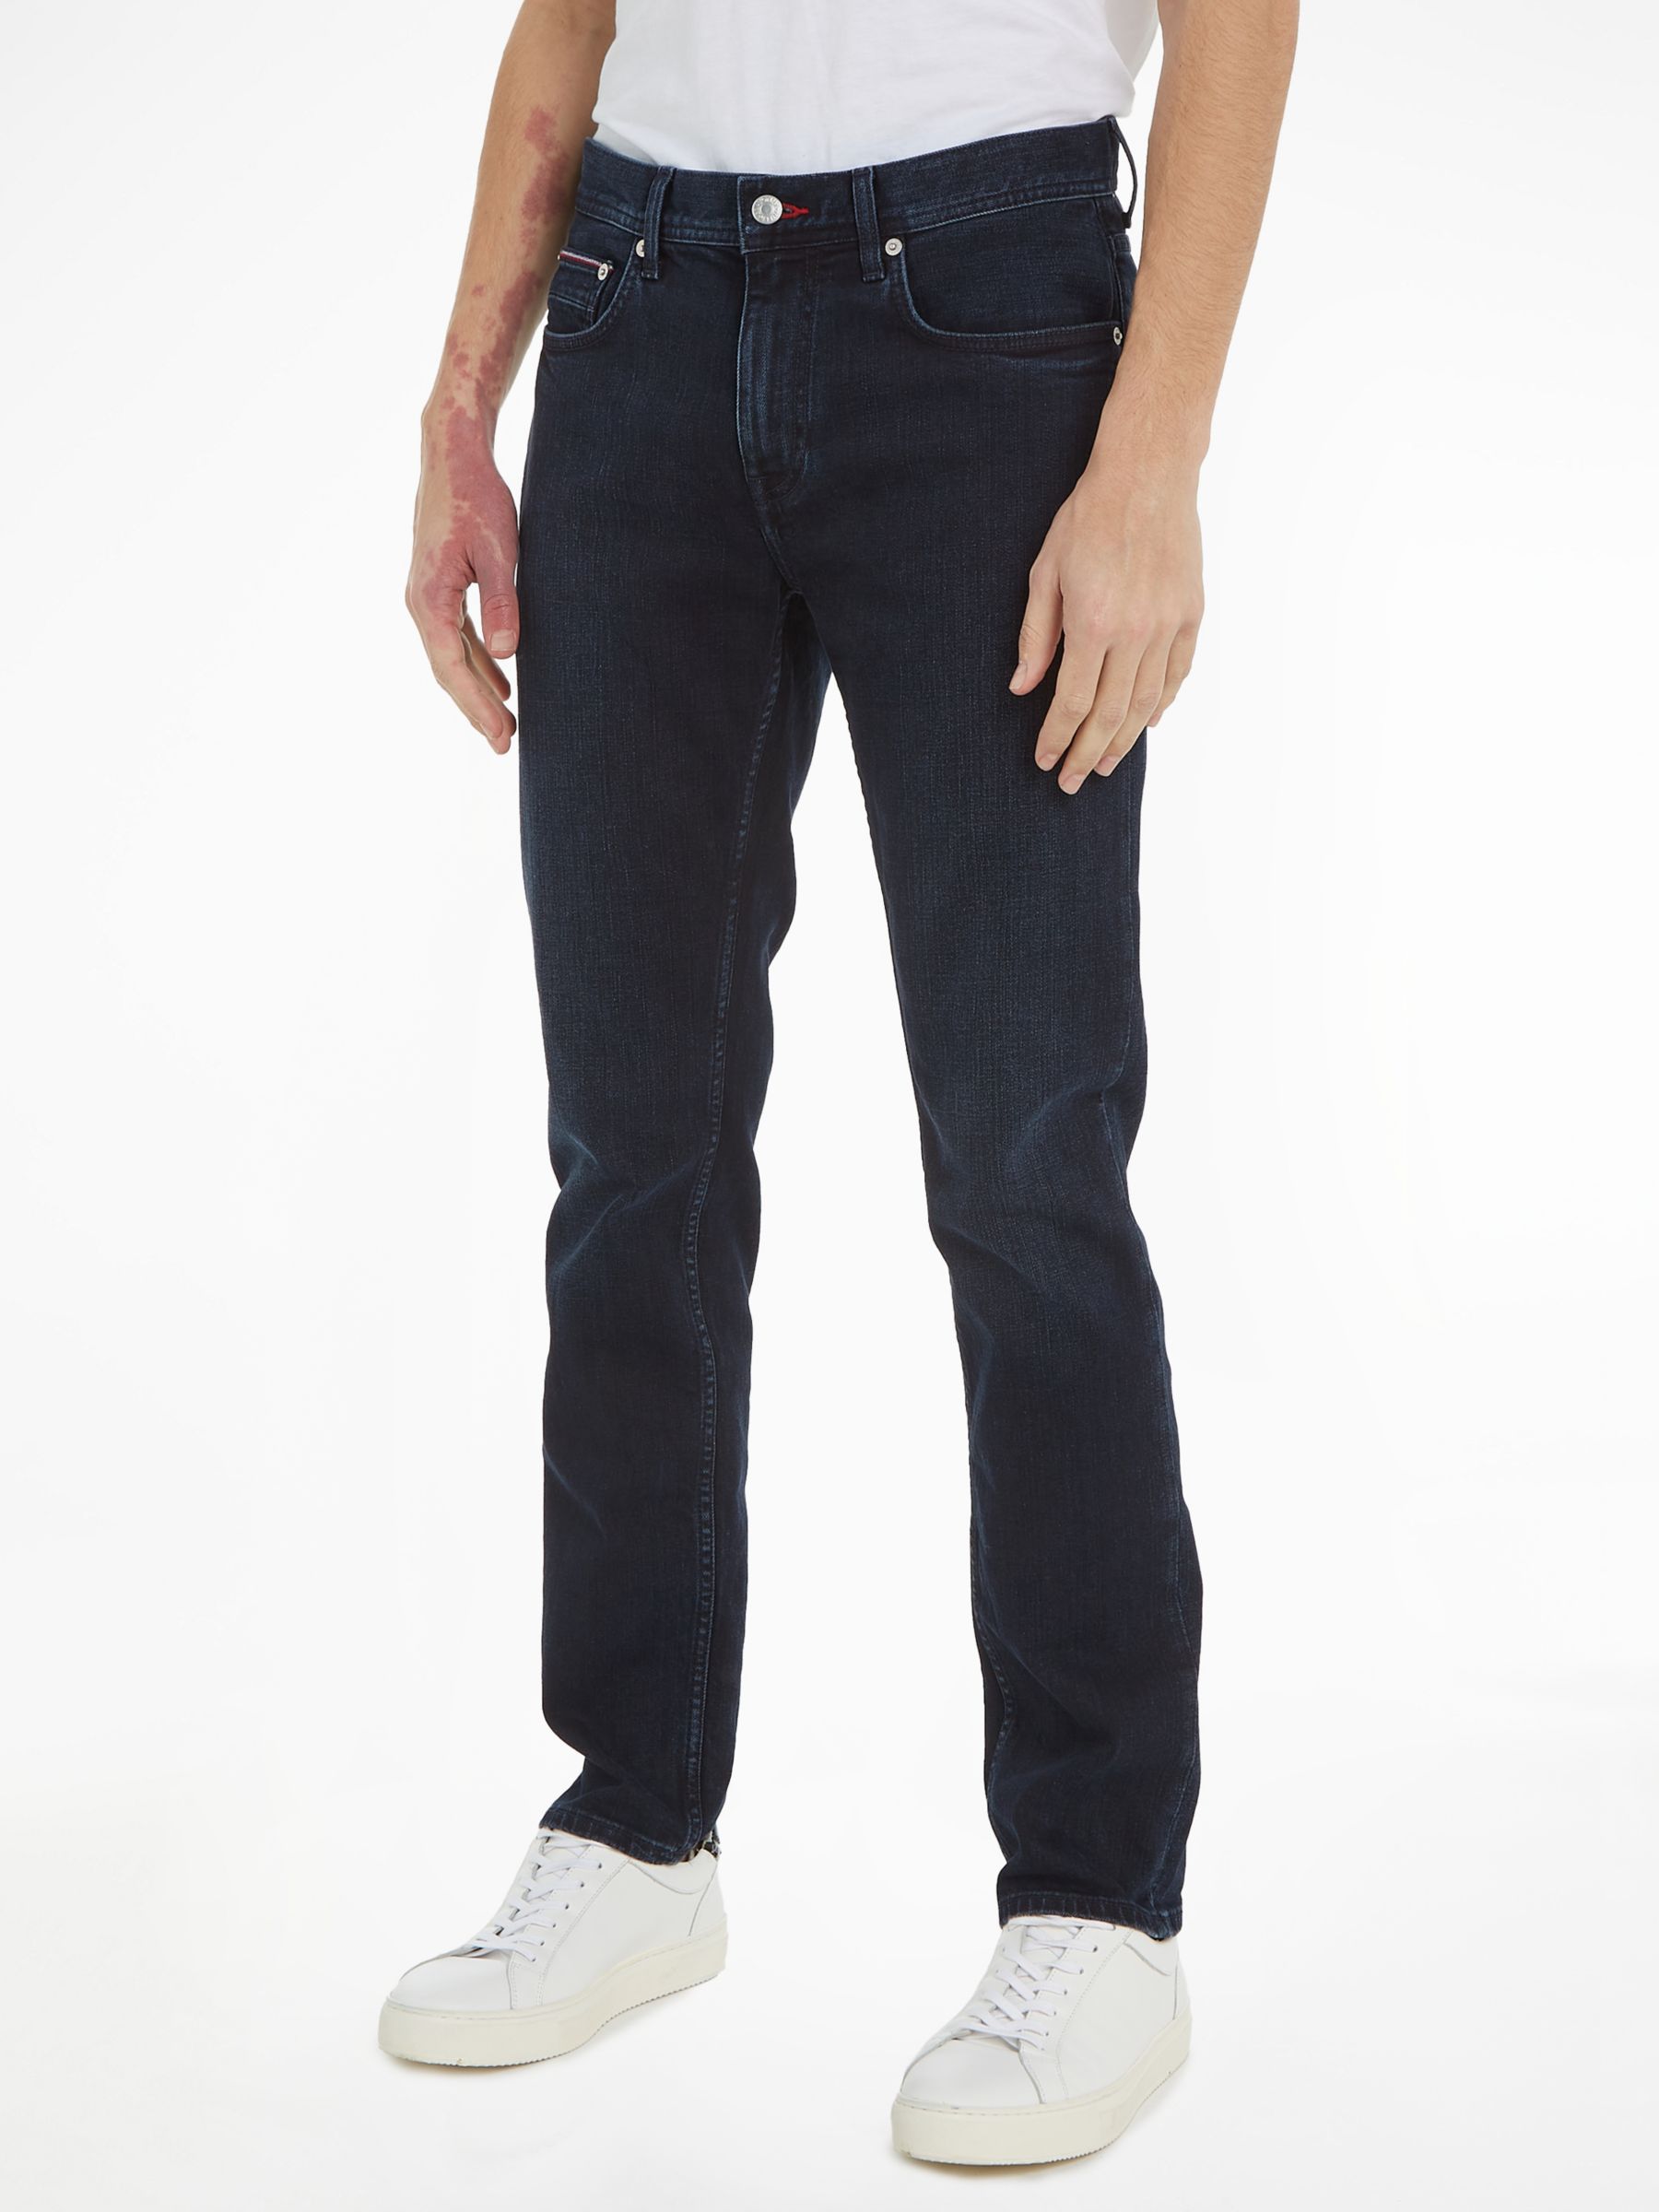 Tommy Hilfiger Straight Denton Jeans, Navy at John Lewis & Partners